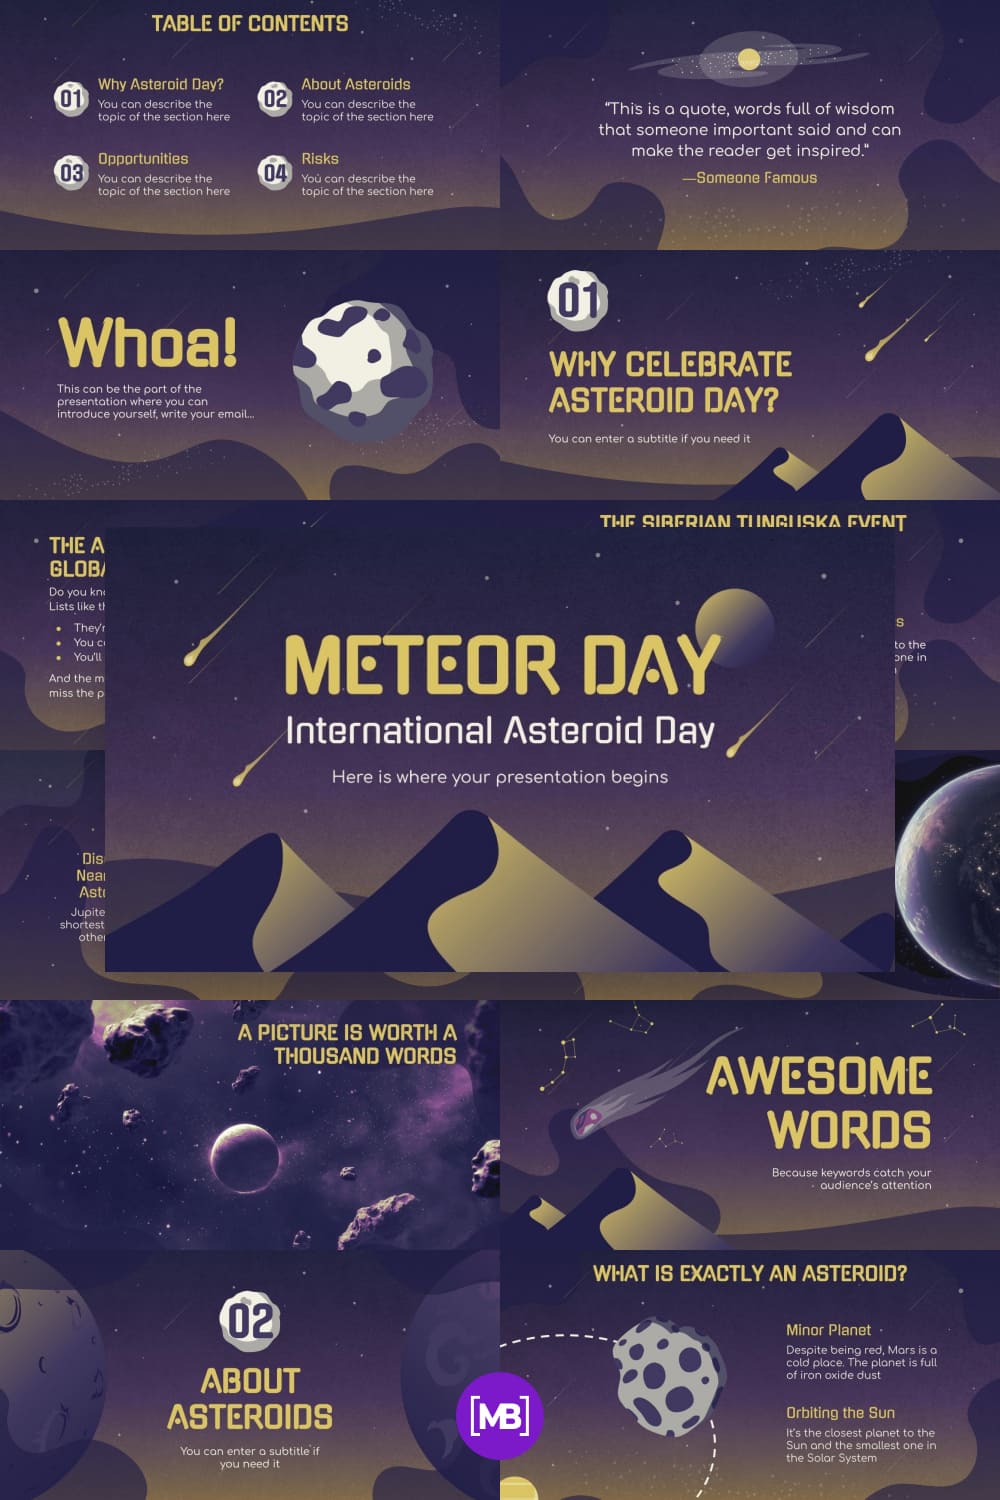 Meteor day - international asteroid day.